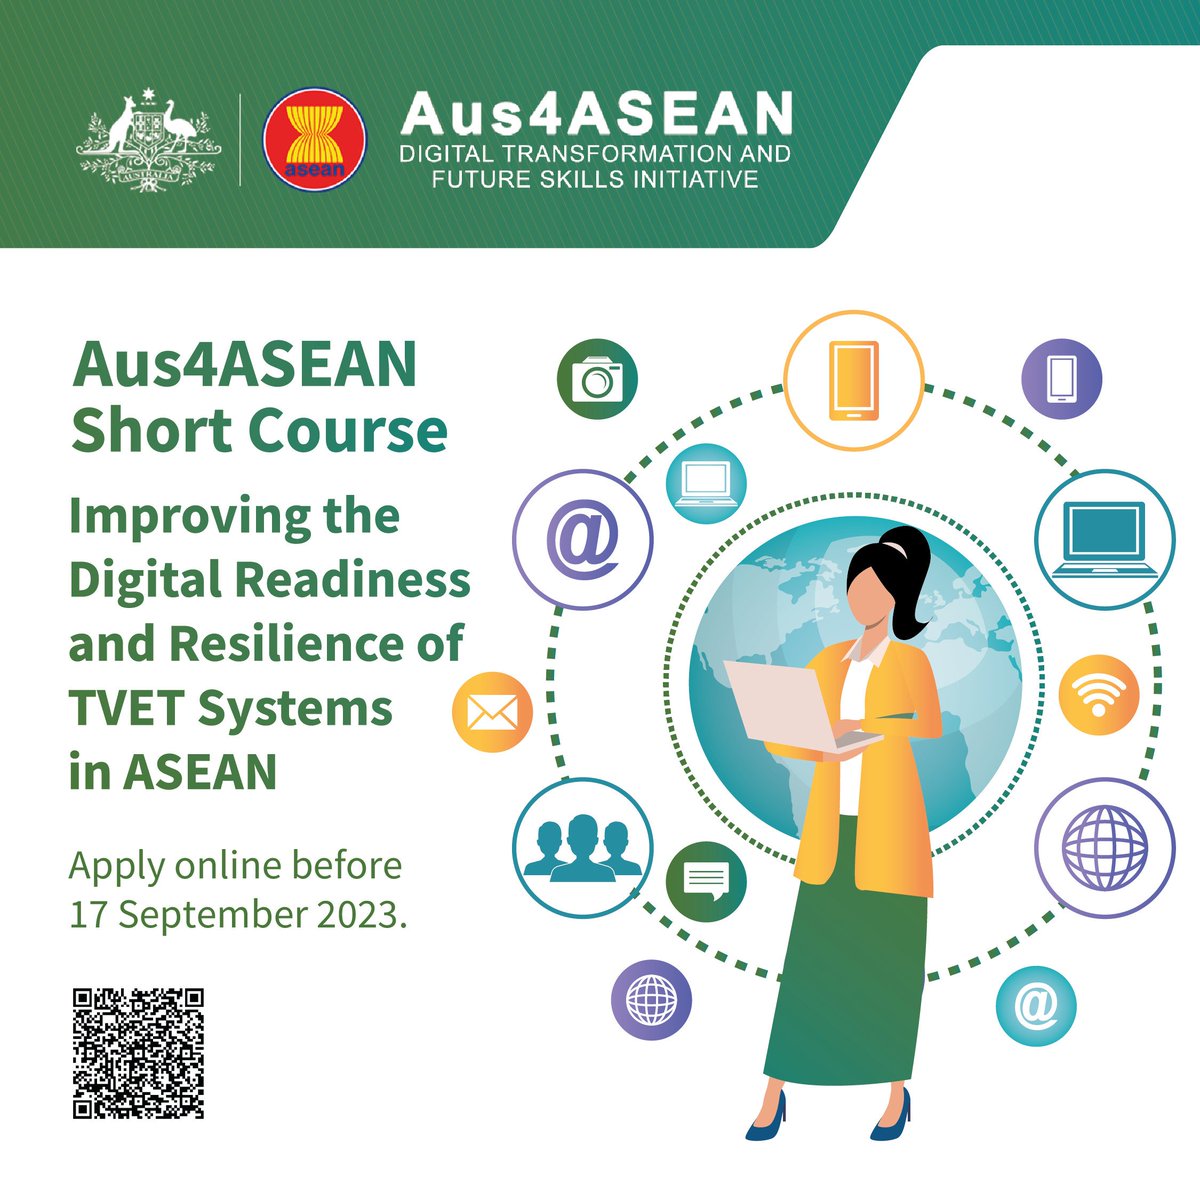 📢 Calling all Technical & Vocational Education & Training professionals from ASEAN countries! Applications are open for Digital Readiness Short Courses in Australia under the #Aus4ASEAN Digital Transformation & Futures Skills Initiative. Apply by 17 Sep👇